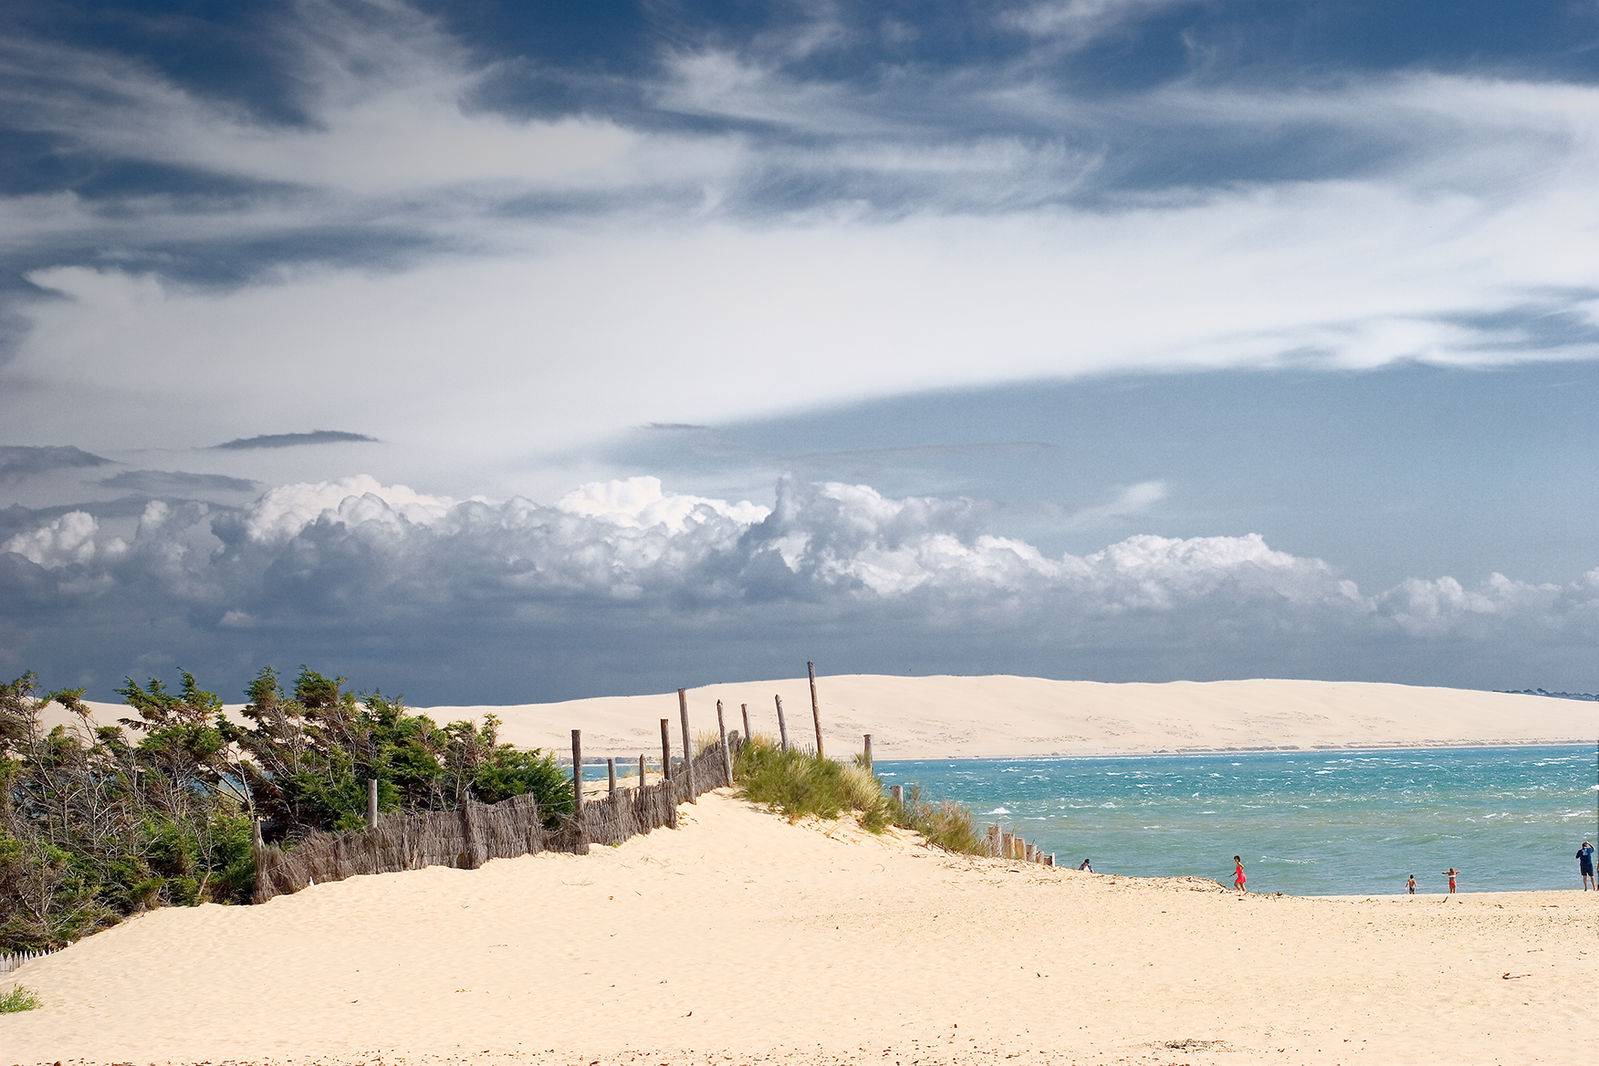 The wild beauty of the tip of Cap Ferret on the Basin d’Arcachon